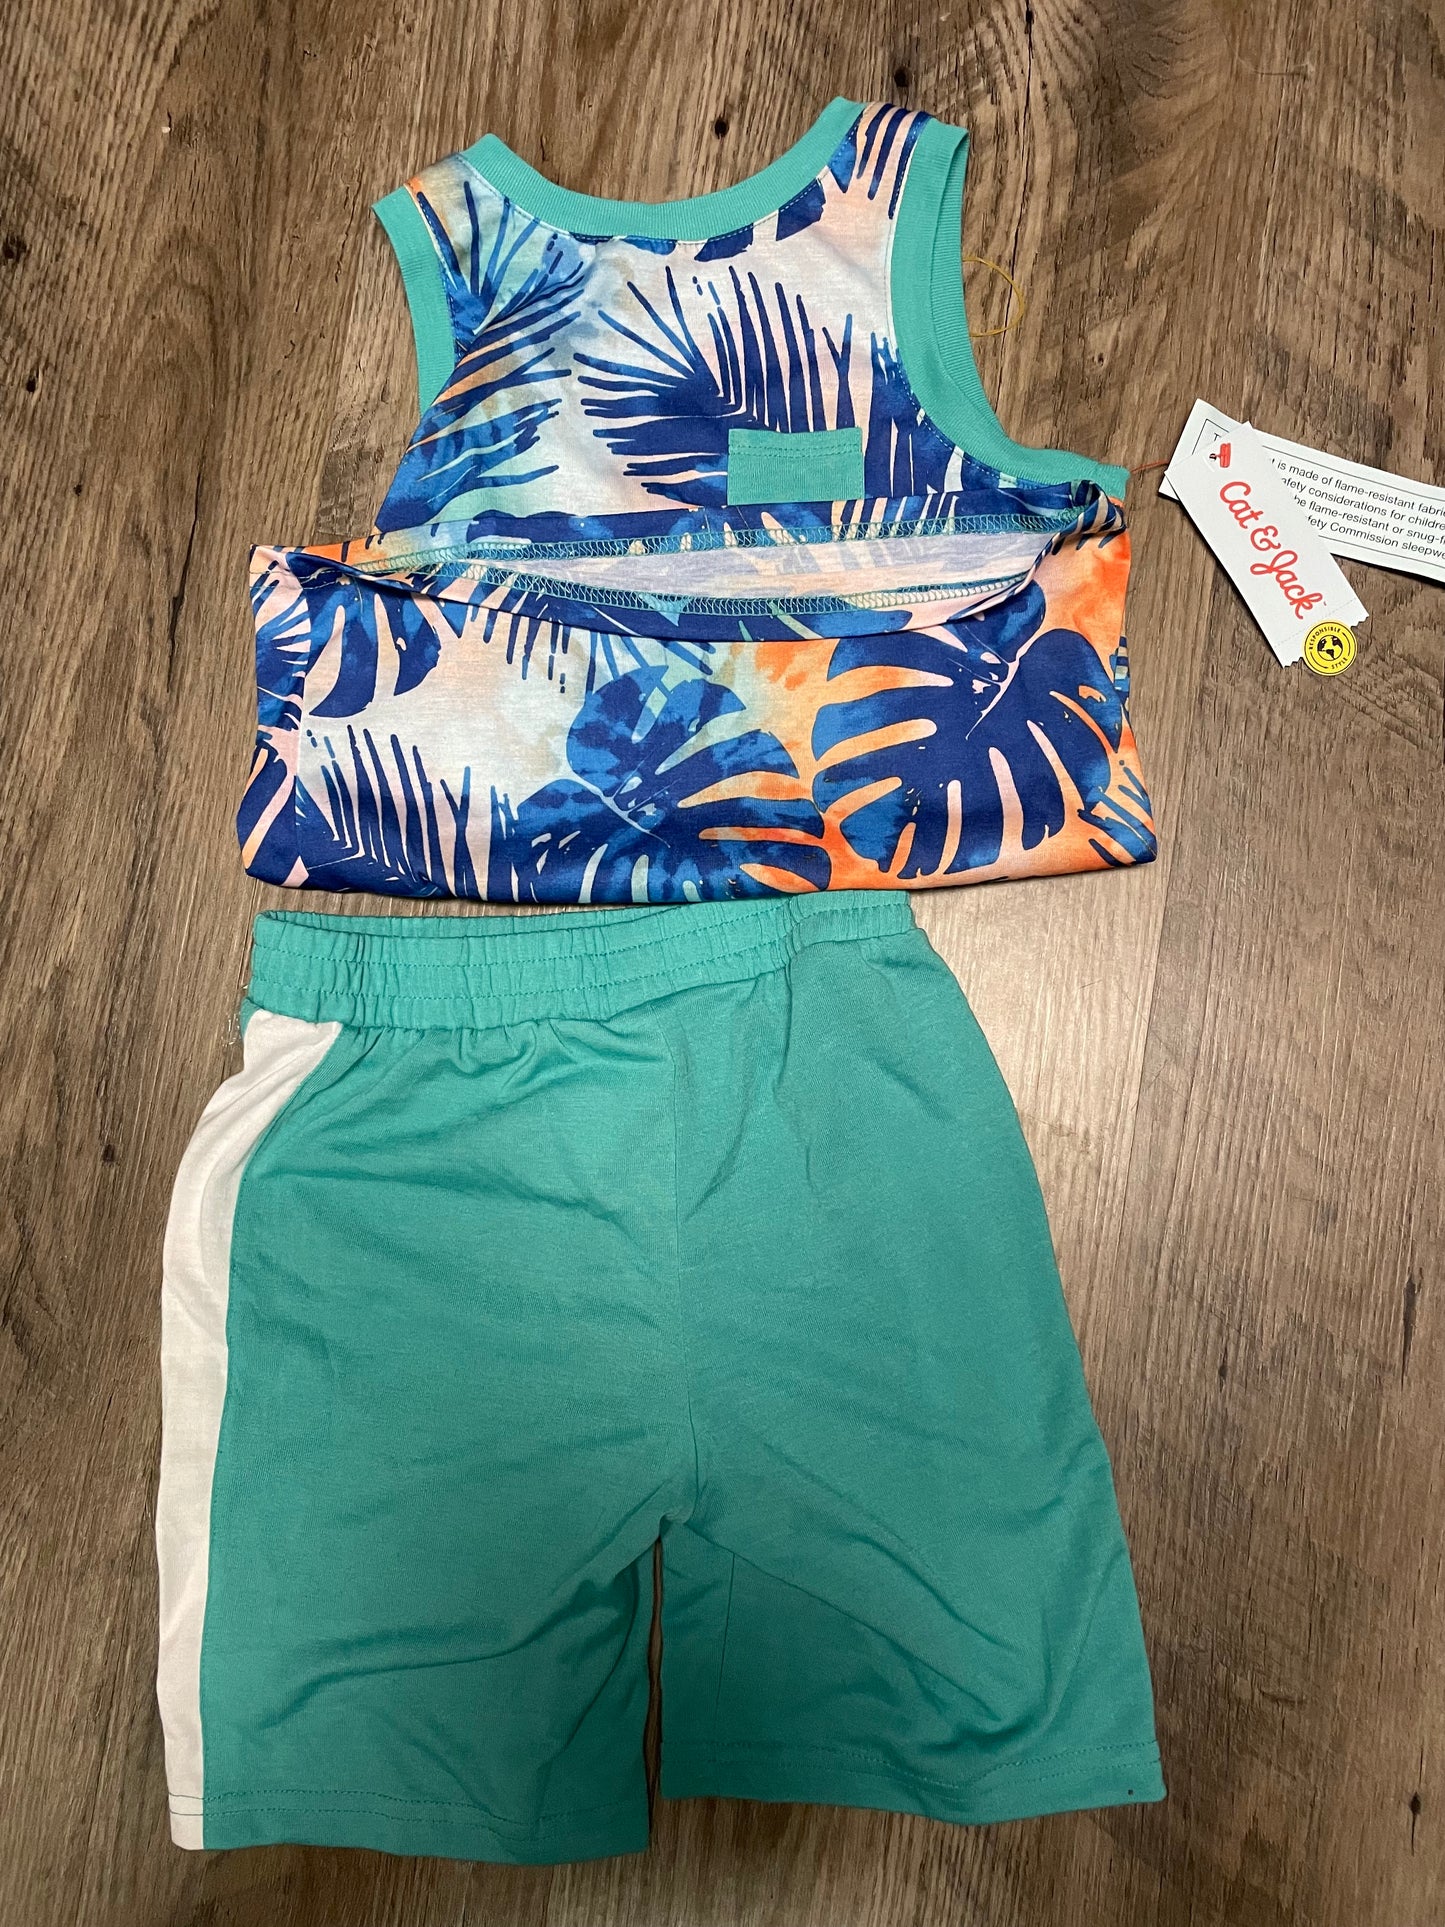 New Boy small 6/7 two piece outfit summer